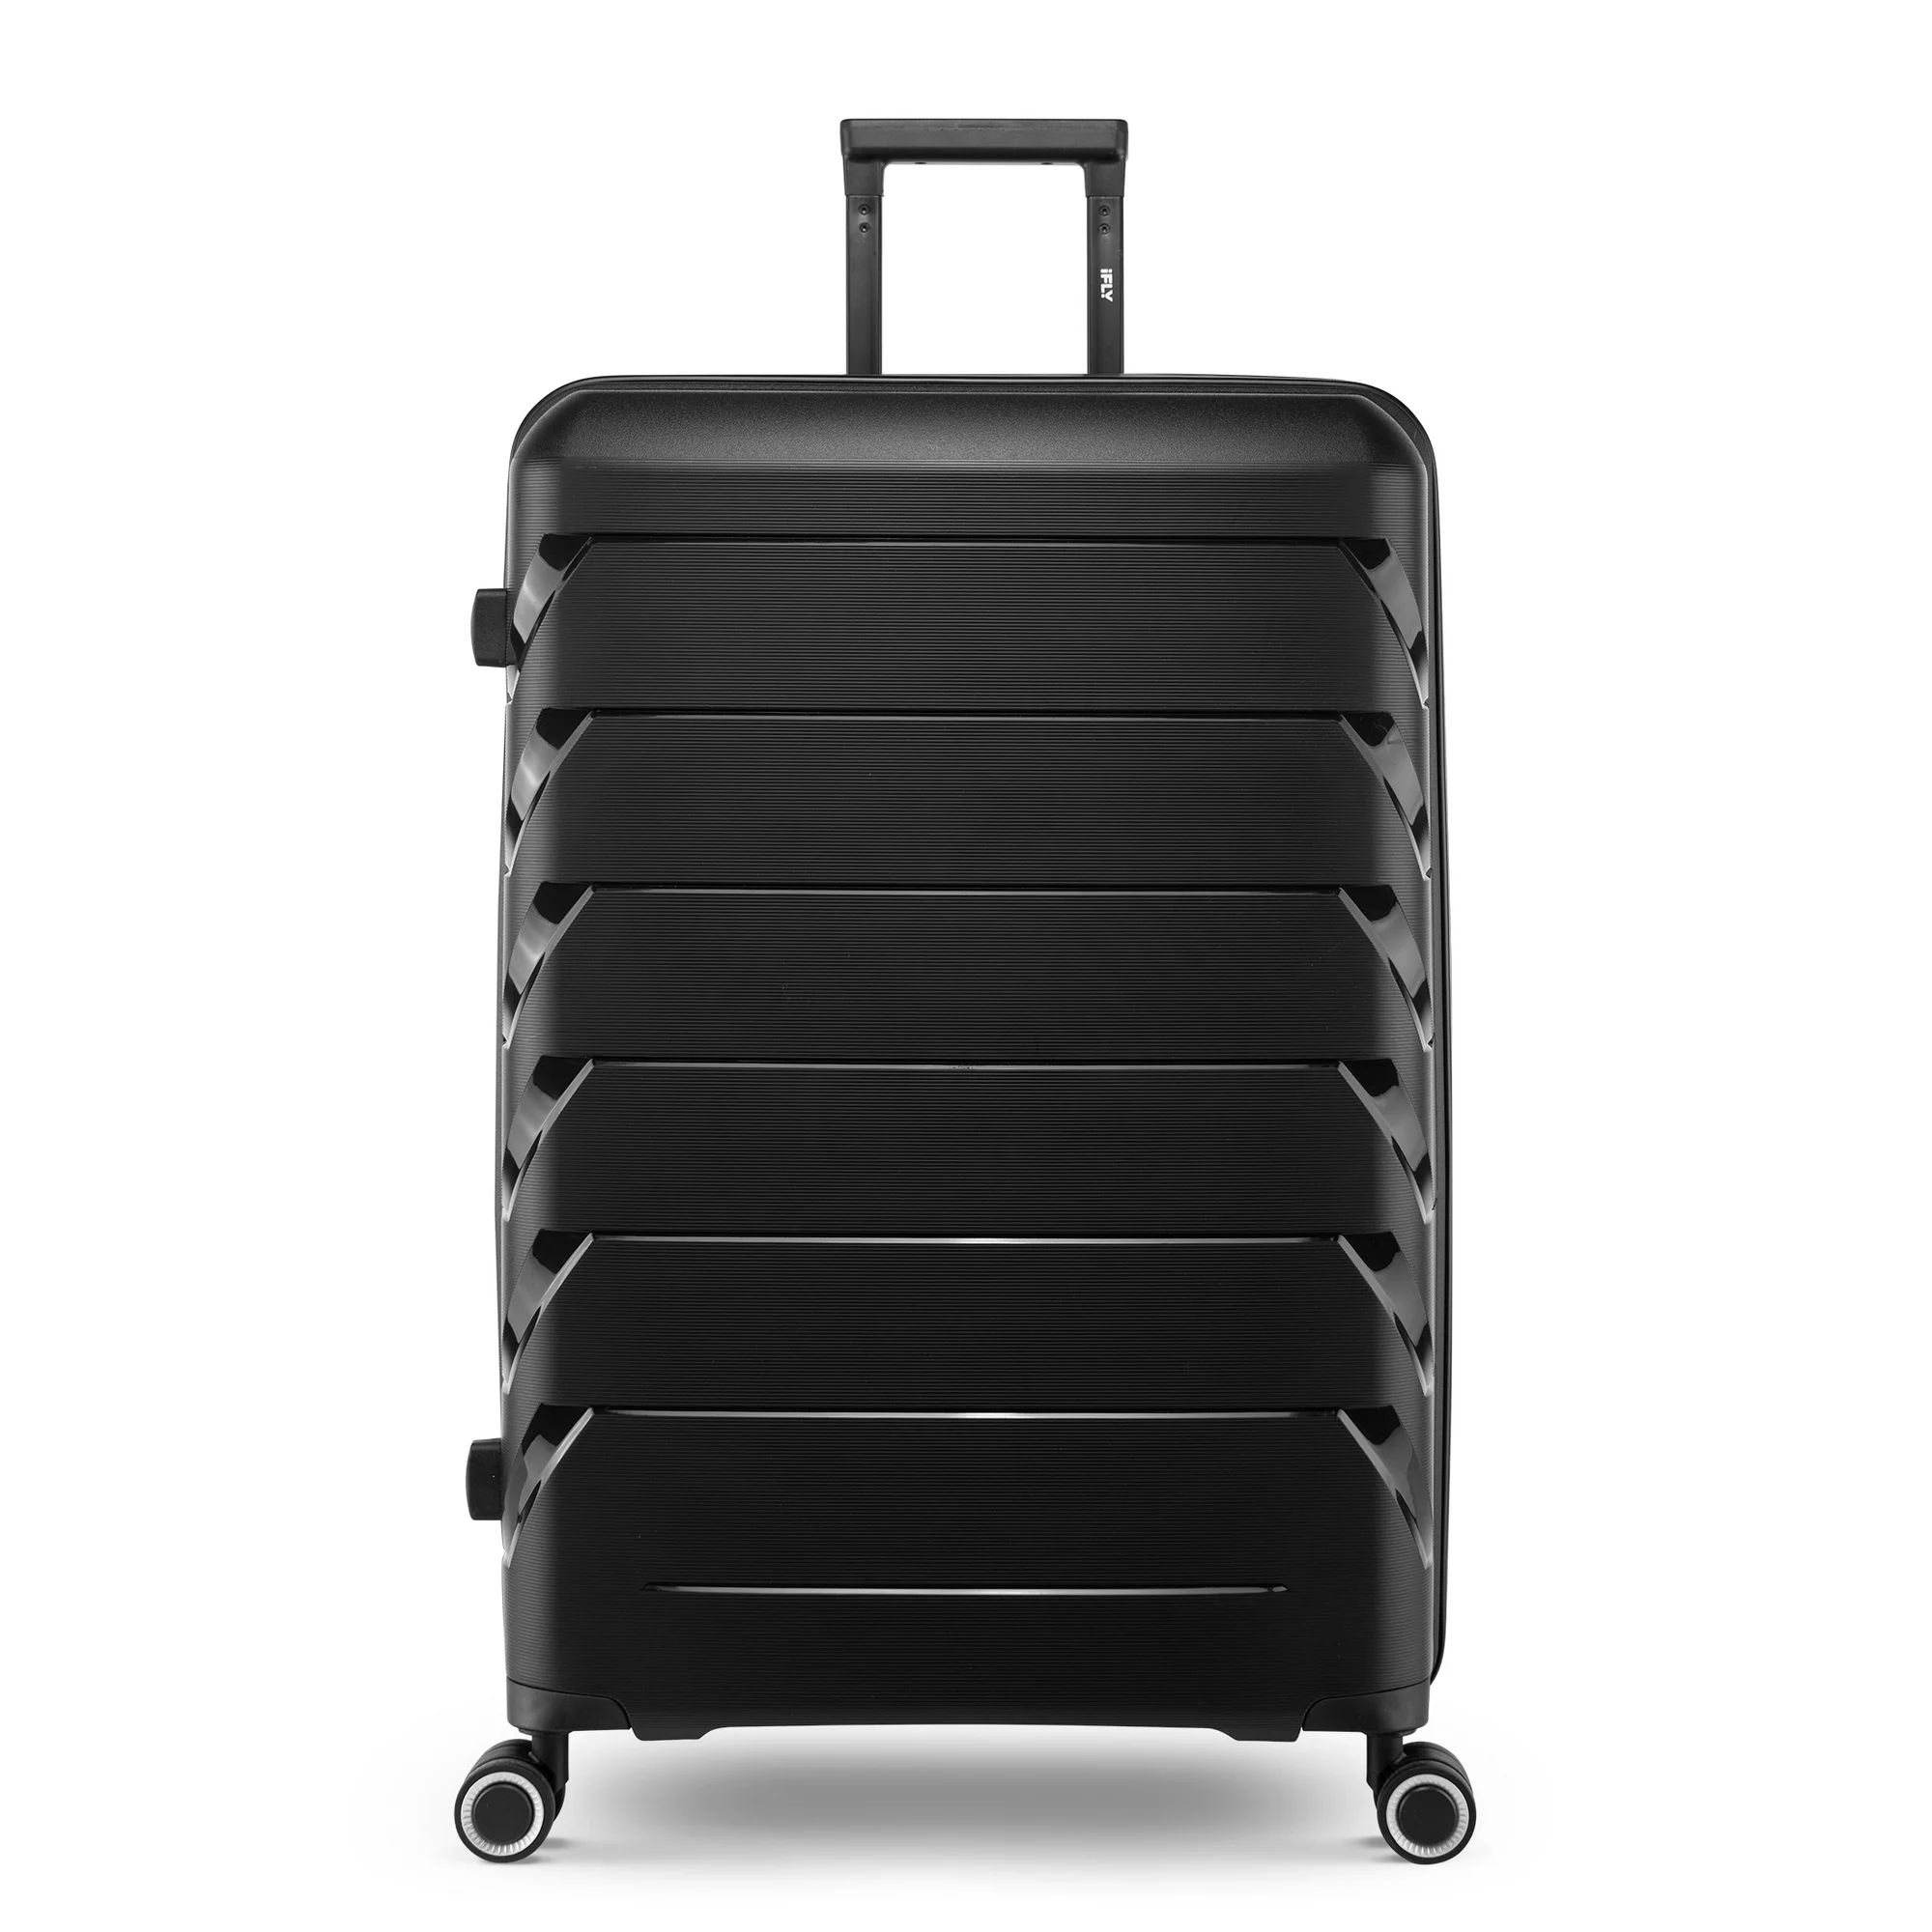 PUR by iFLY Hardside 30" Checked Luggage, Black | Walmart (US)